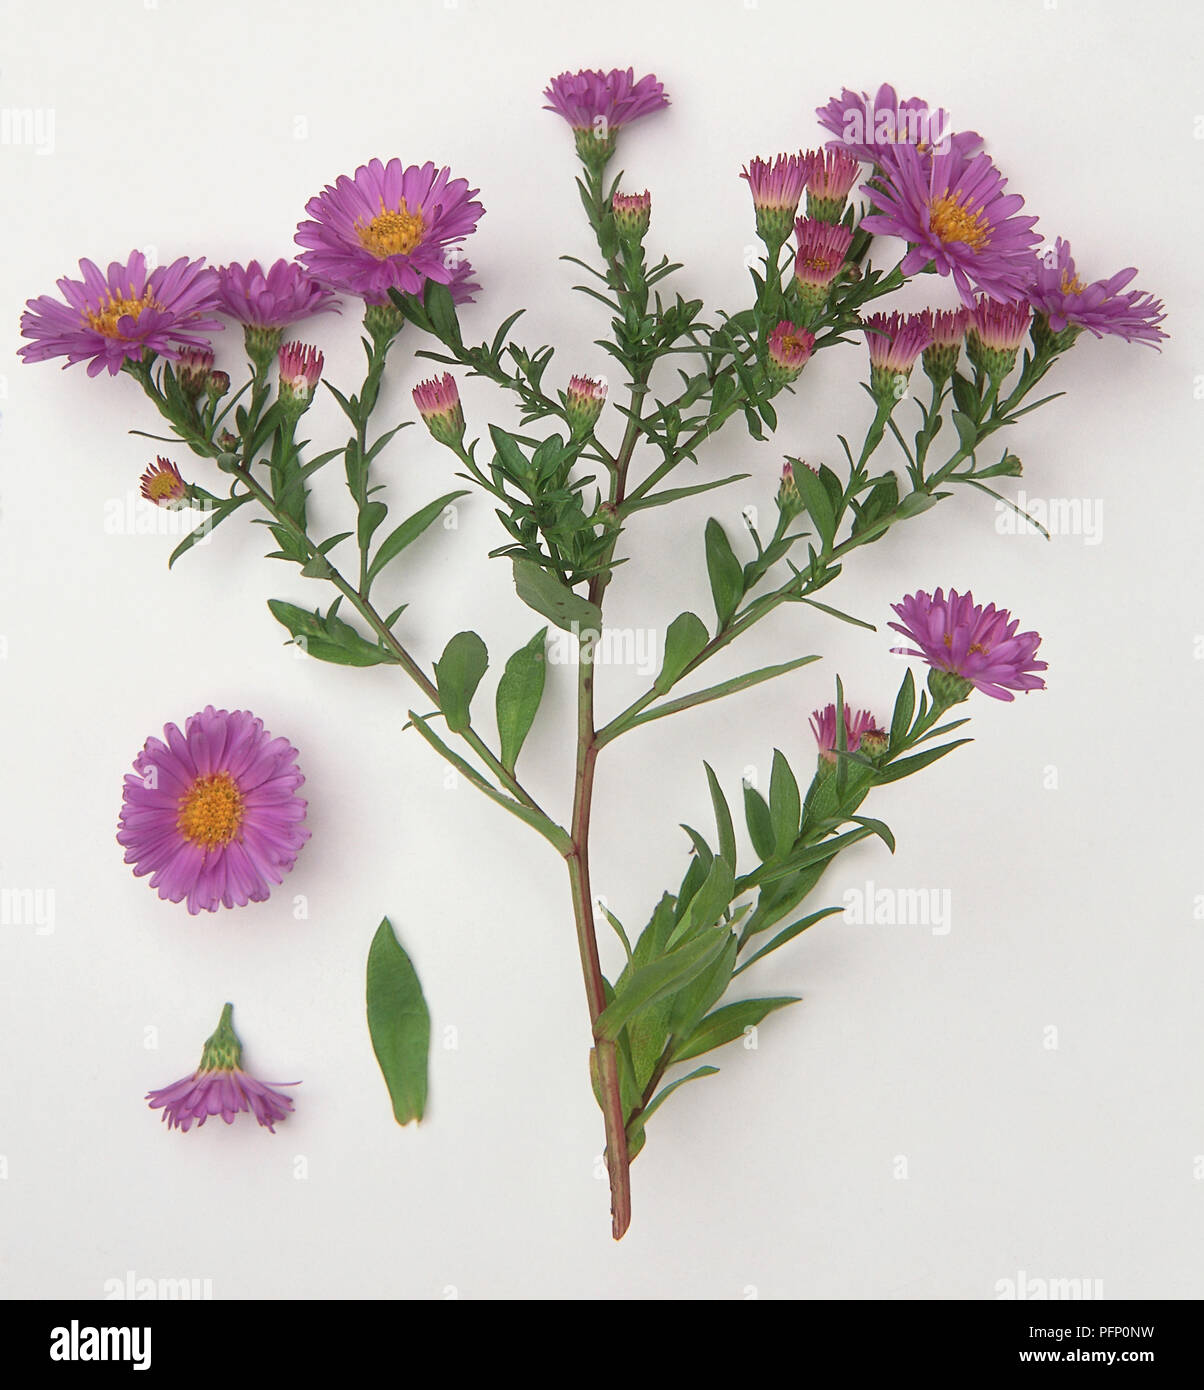 Aster Novi Belgii Michaelmas Daisy Branched Upright Flowering Stem Bearing Lance Shaped Stem Leaves Or Foliage And Daisy Or Composite Flowerheads Or Flowers Made Up Of Purple Or Pink Ray Florets And Gold Disc